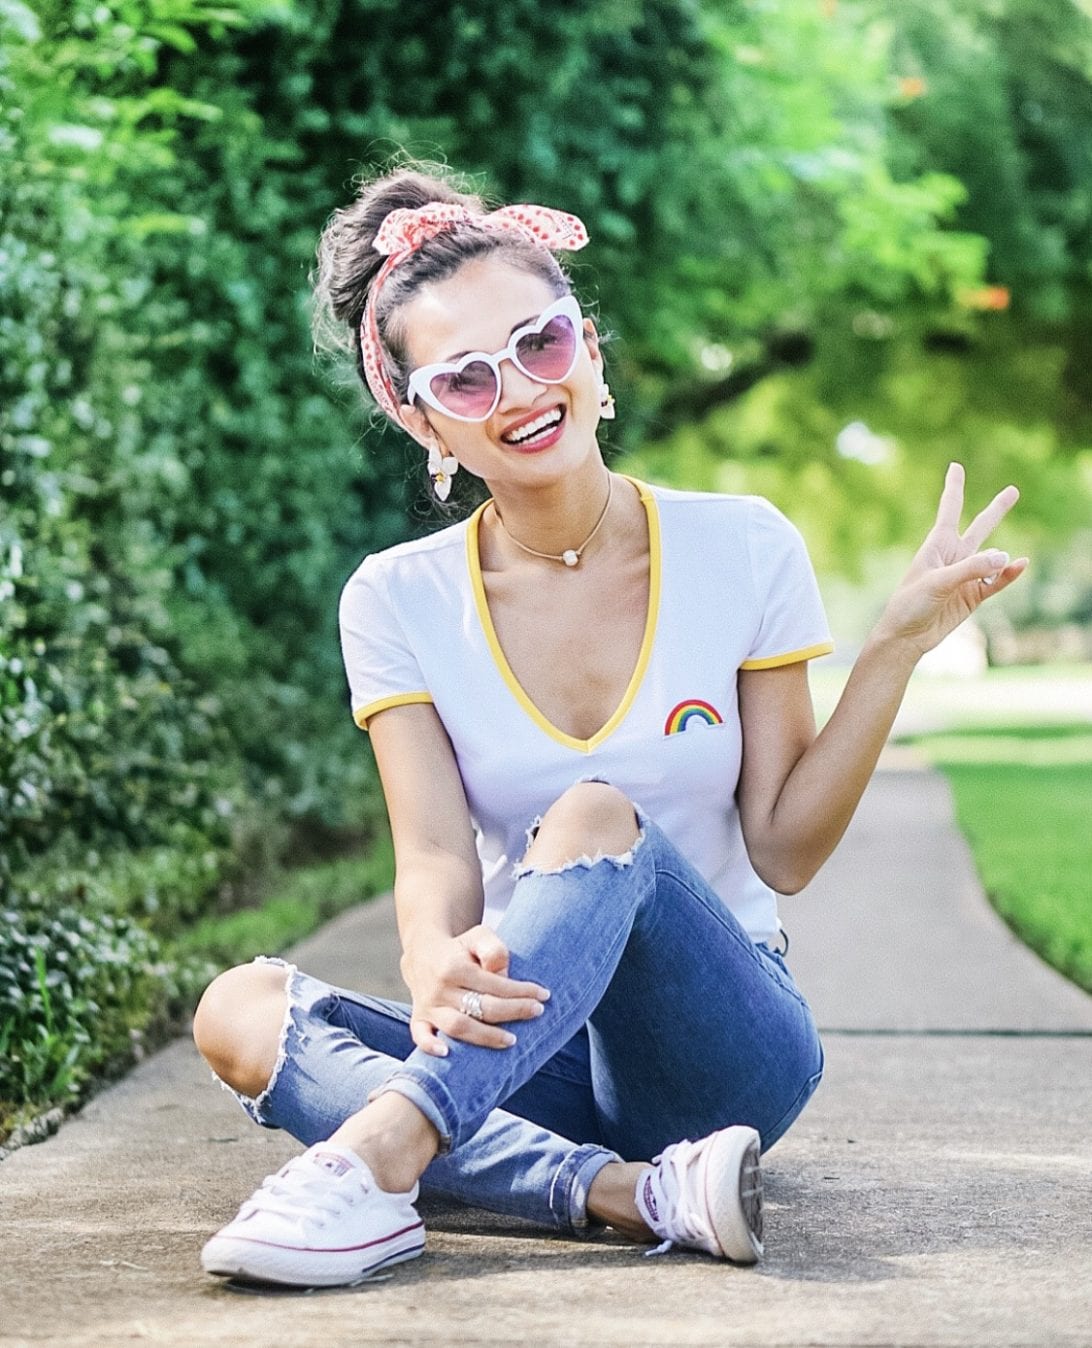 heart shaped sunglasses, rainbow shirt, #pride #happypride, converse, freepeople jeans, #freepeople, bandana, summer style, summer outfit, flower earrings, #dawnpdarnell